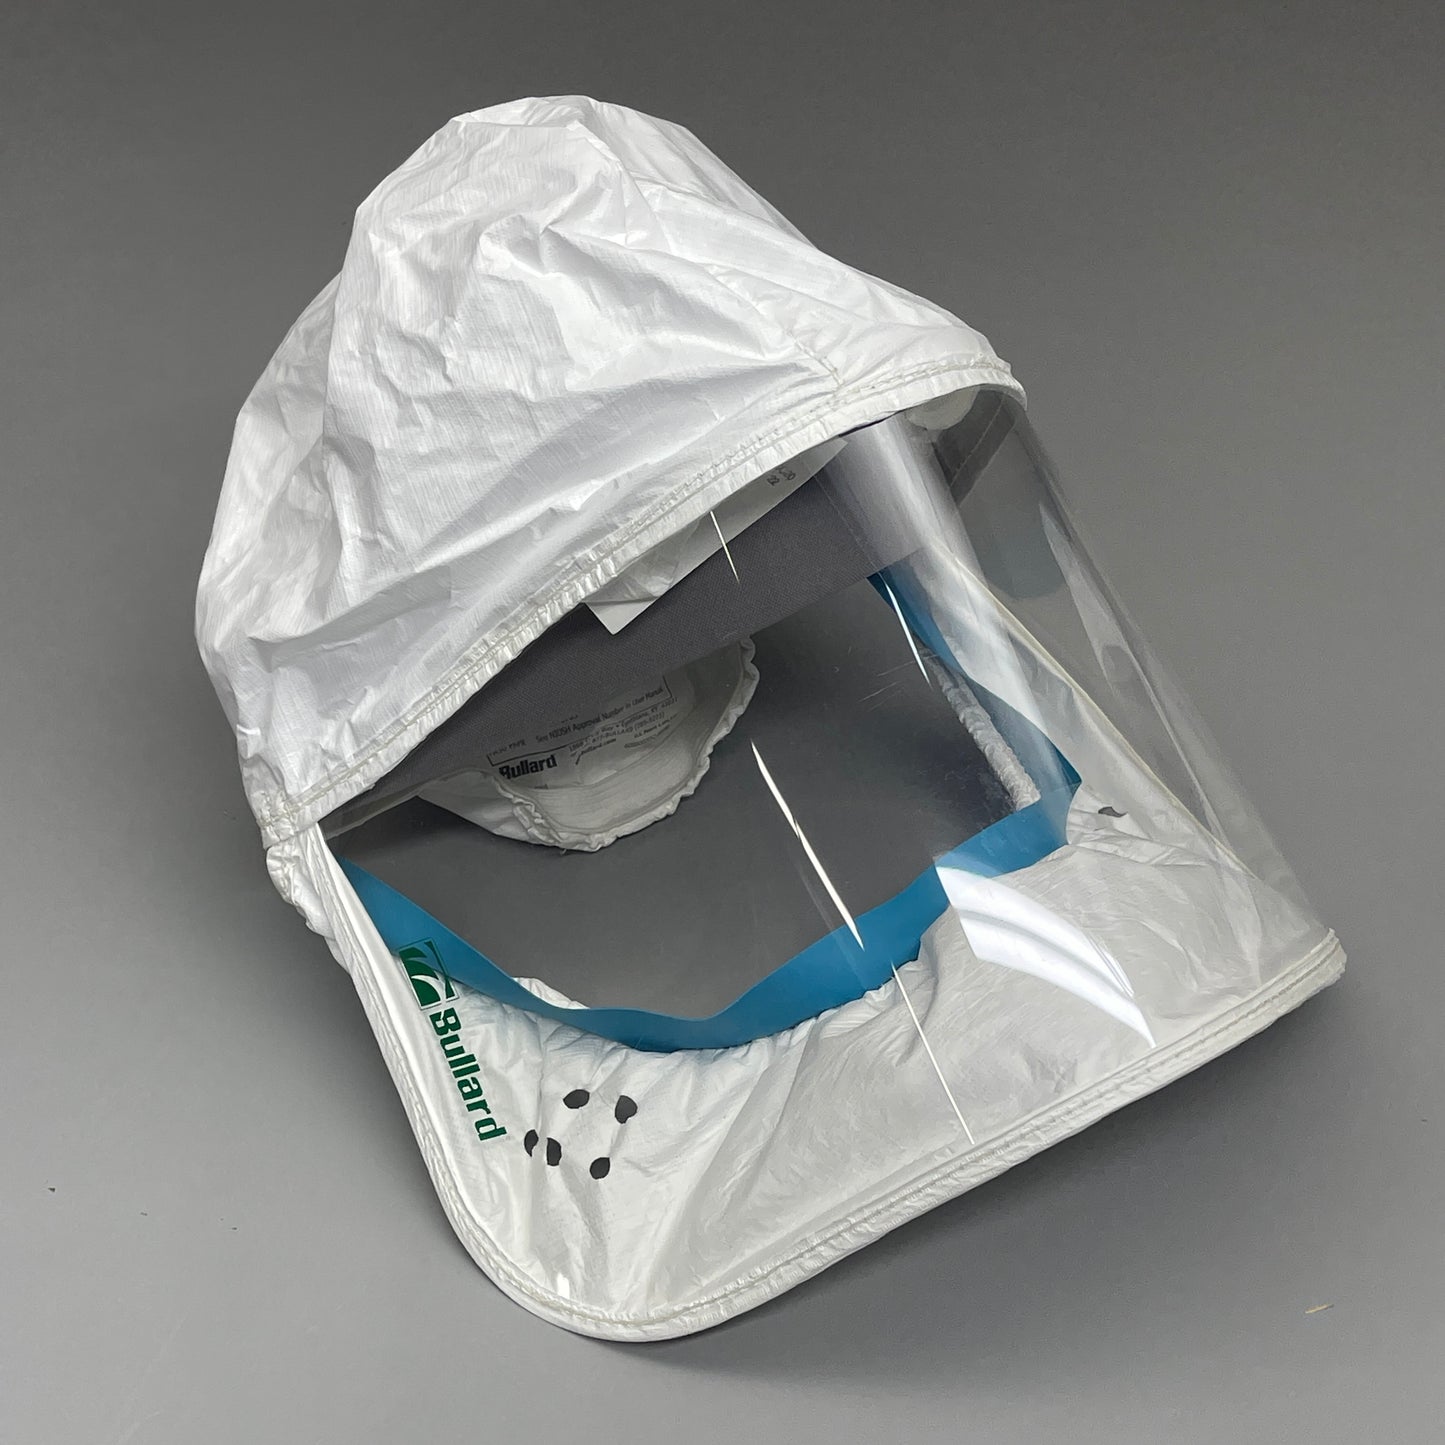 BULLARD (2 PACK) Respirator Hood FacePiece Large 20LFL (for CC20 or PA20/PA30) 8/2011 (New / Old Stock)